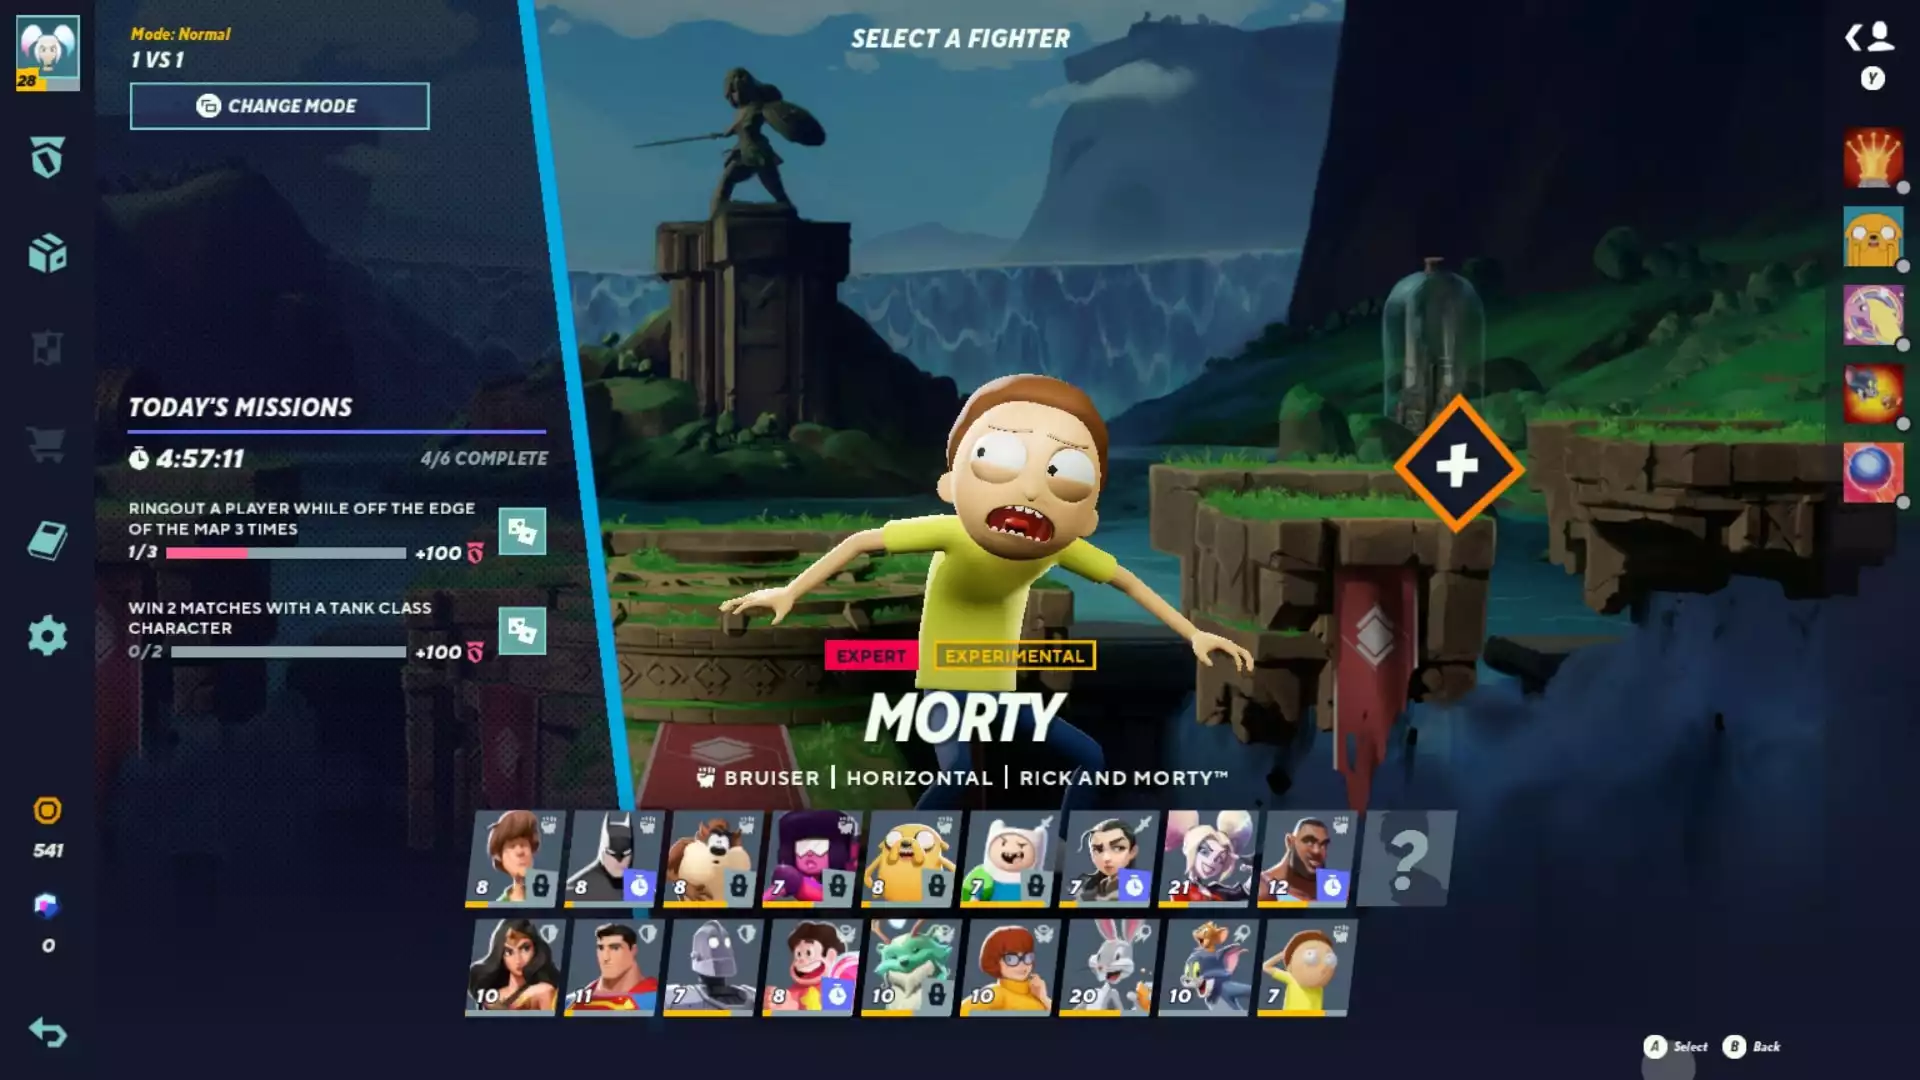 MultiVersus Morty Guide: Combos, Perks, Specials, And More